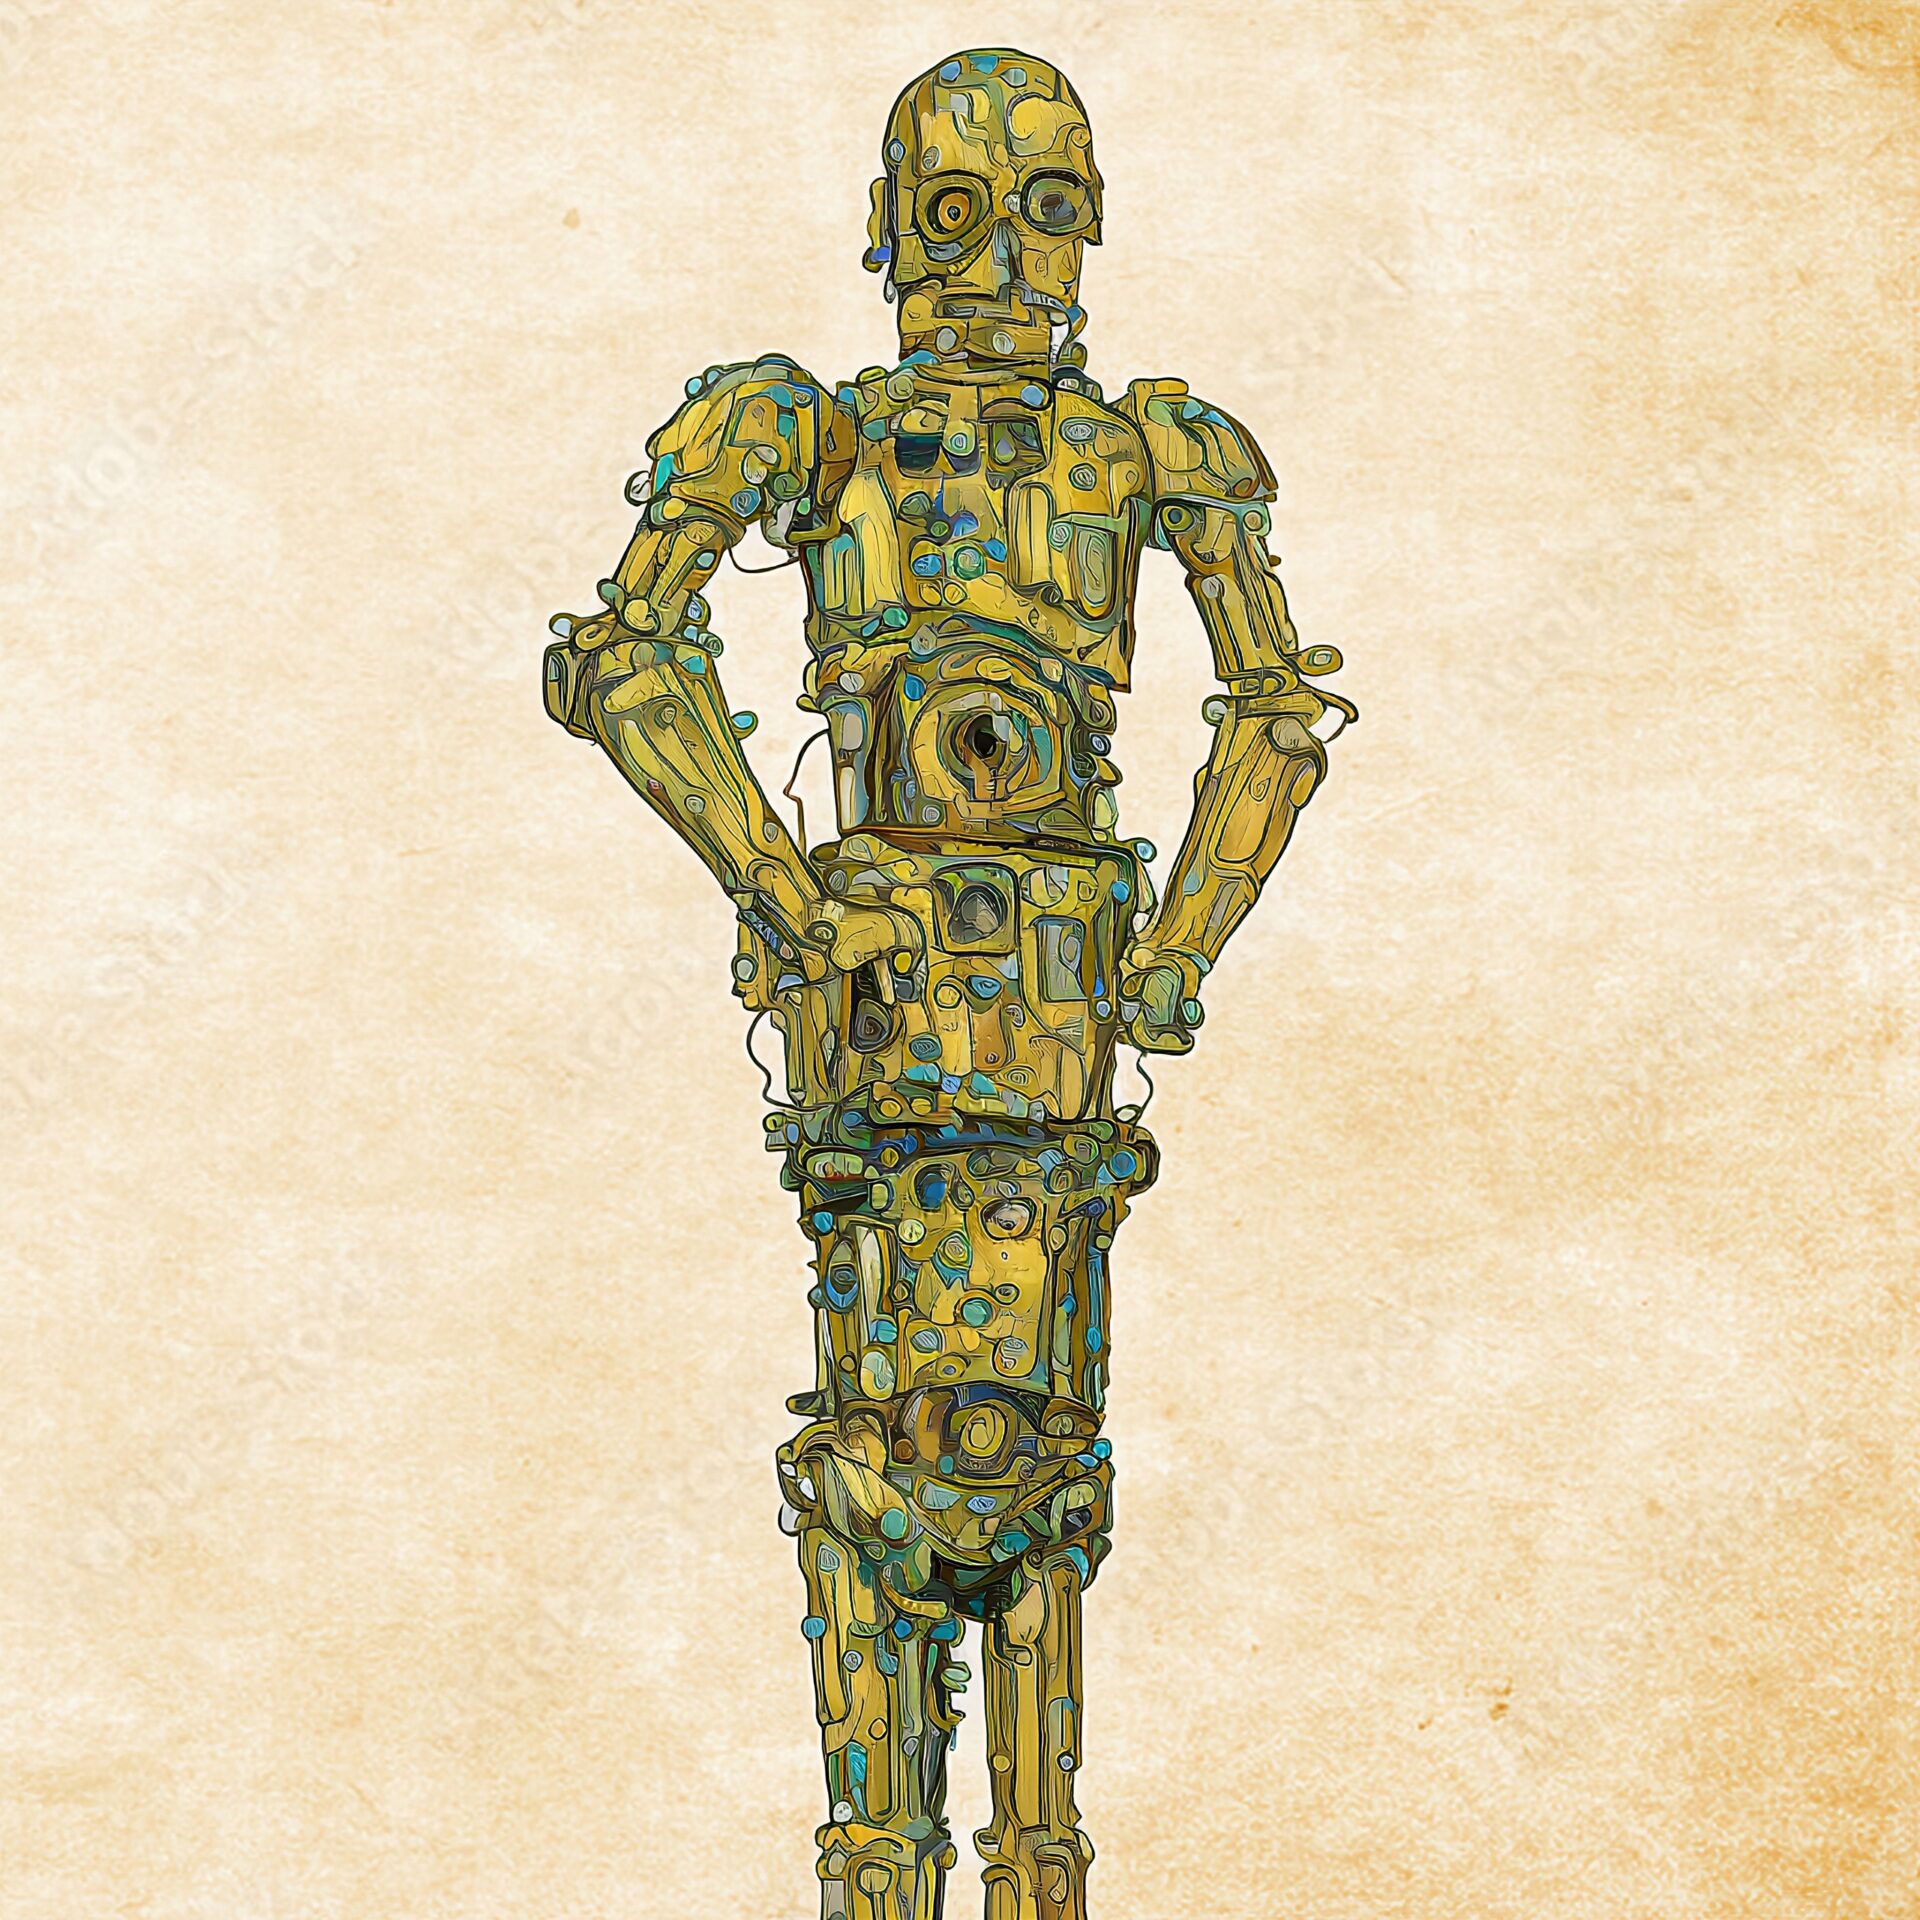 C-3PO on canvas by a professional artist